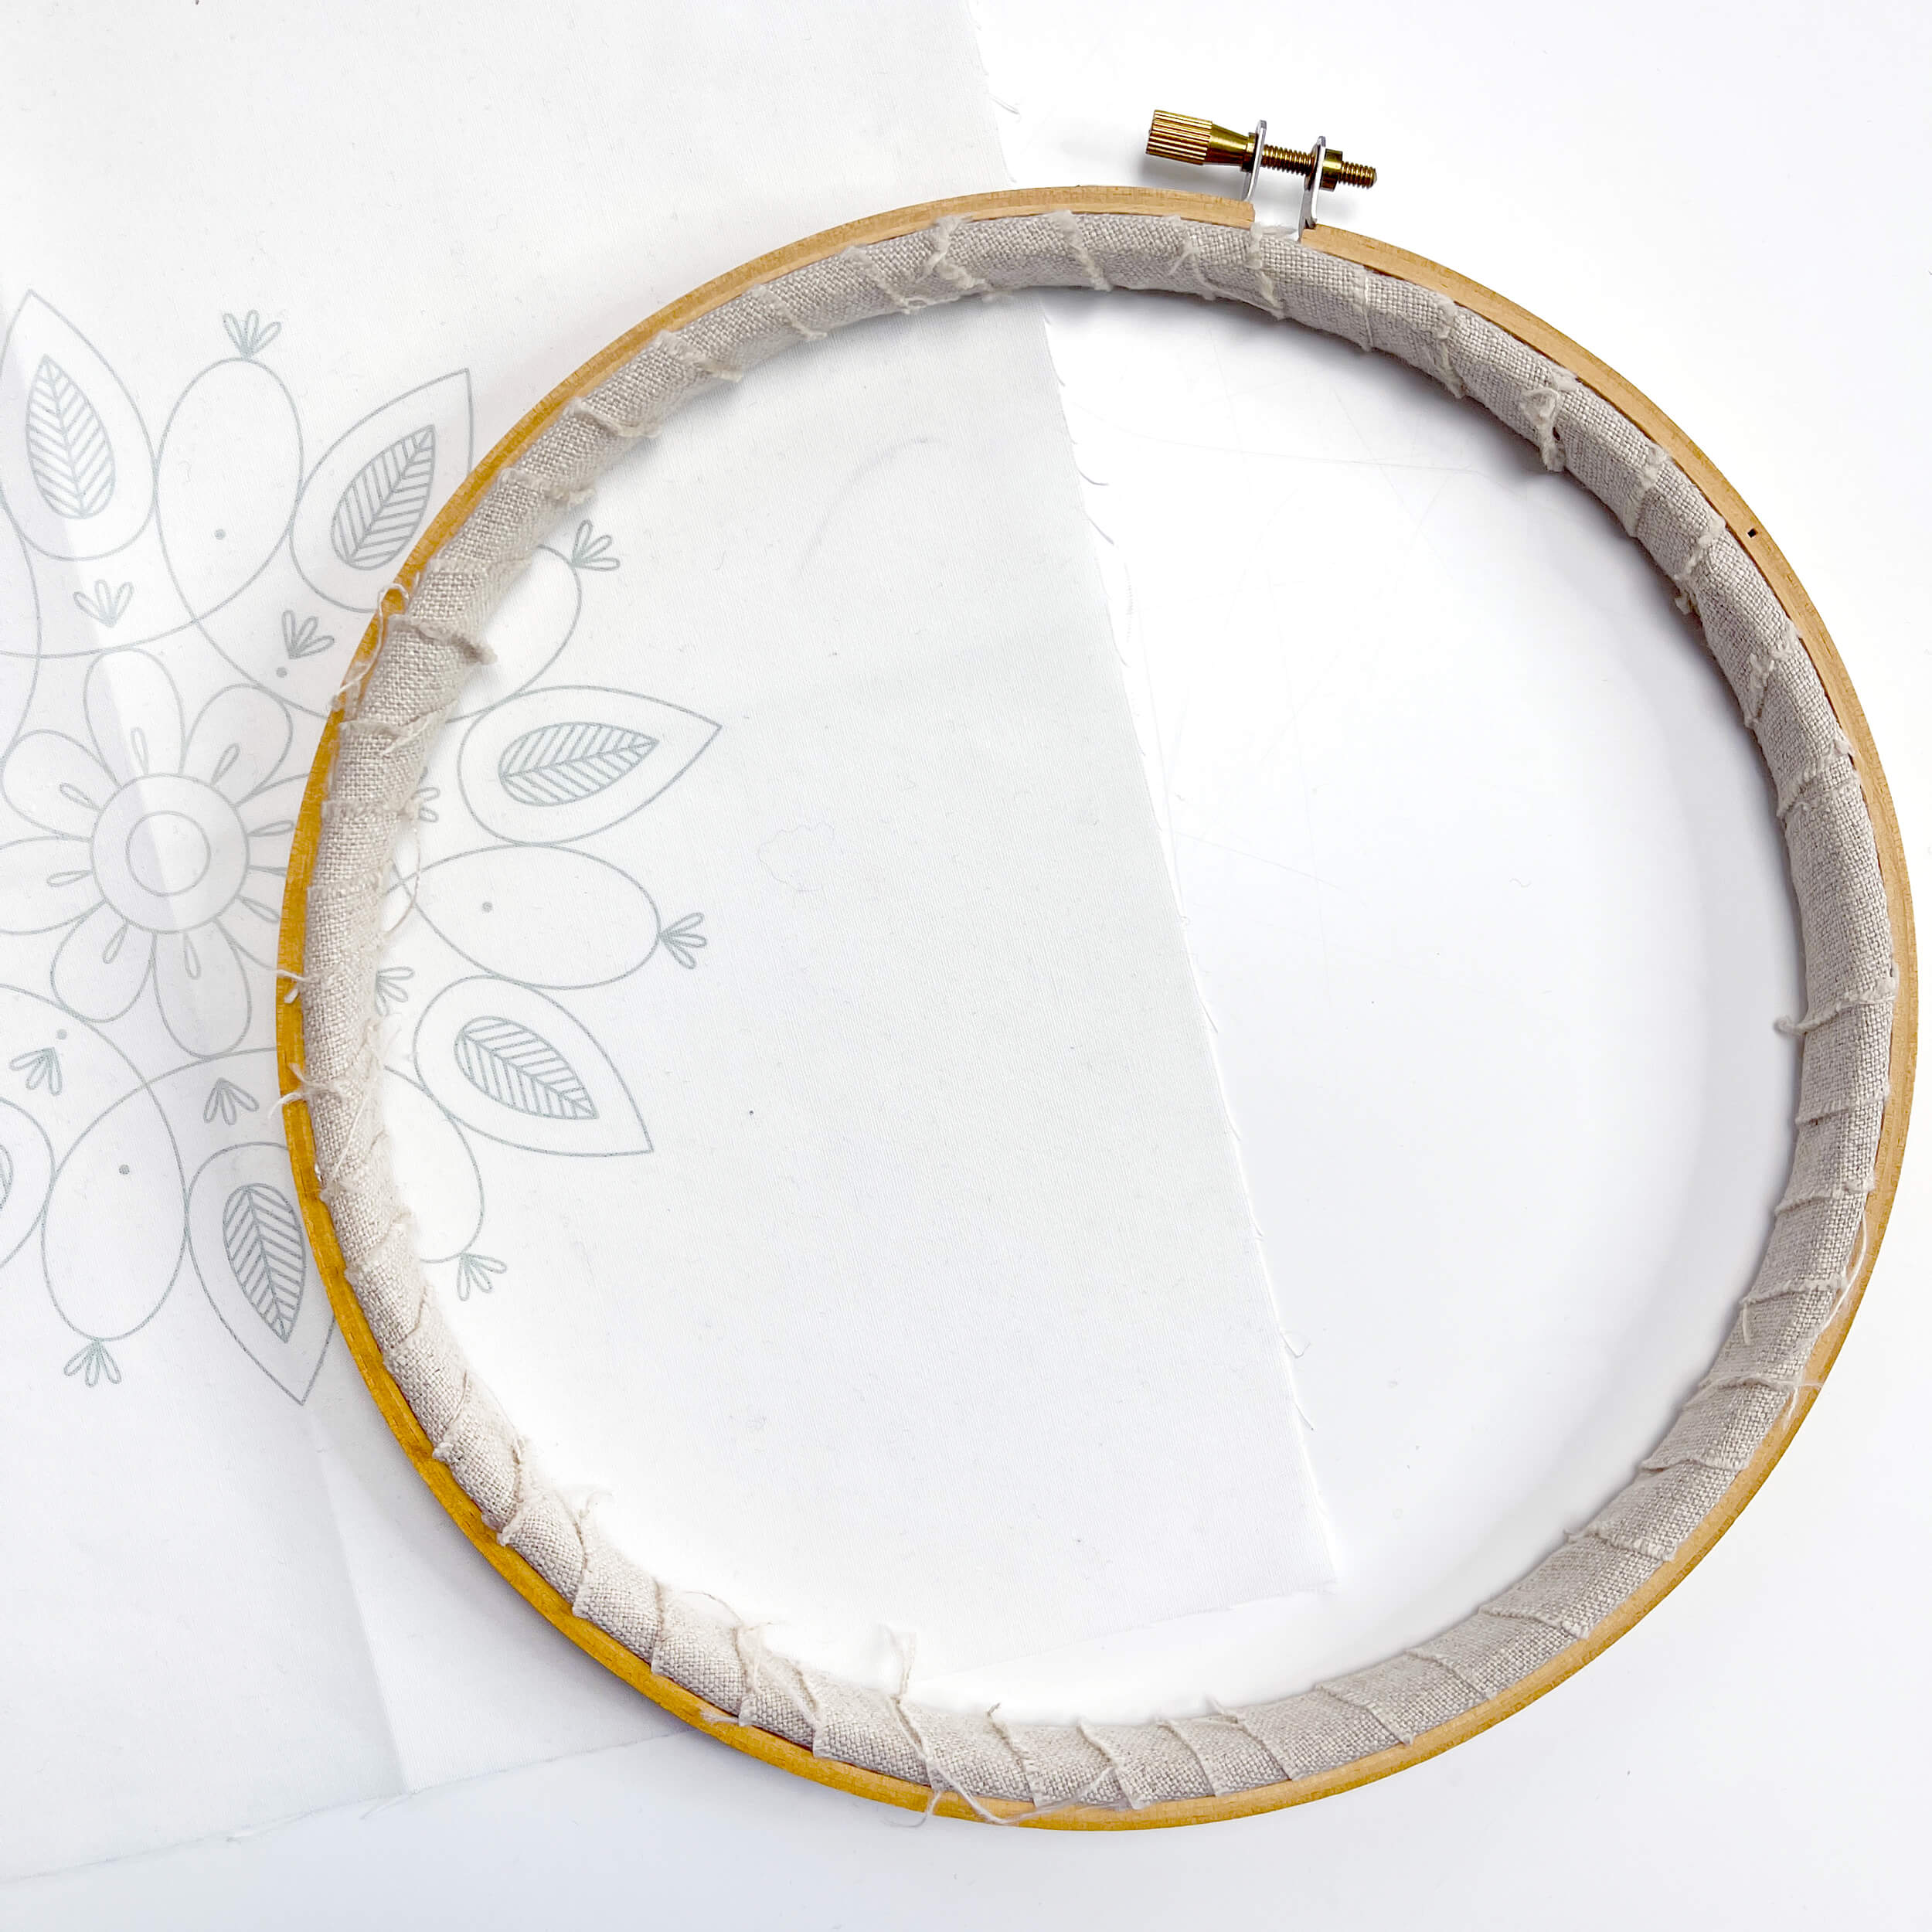 Embroidery hoop with fabric wrapped around the inner hoop on top of a fabric pattern